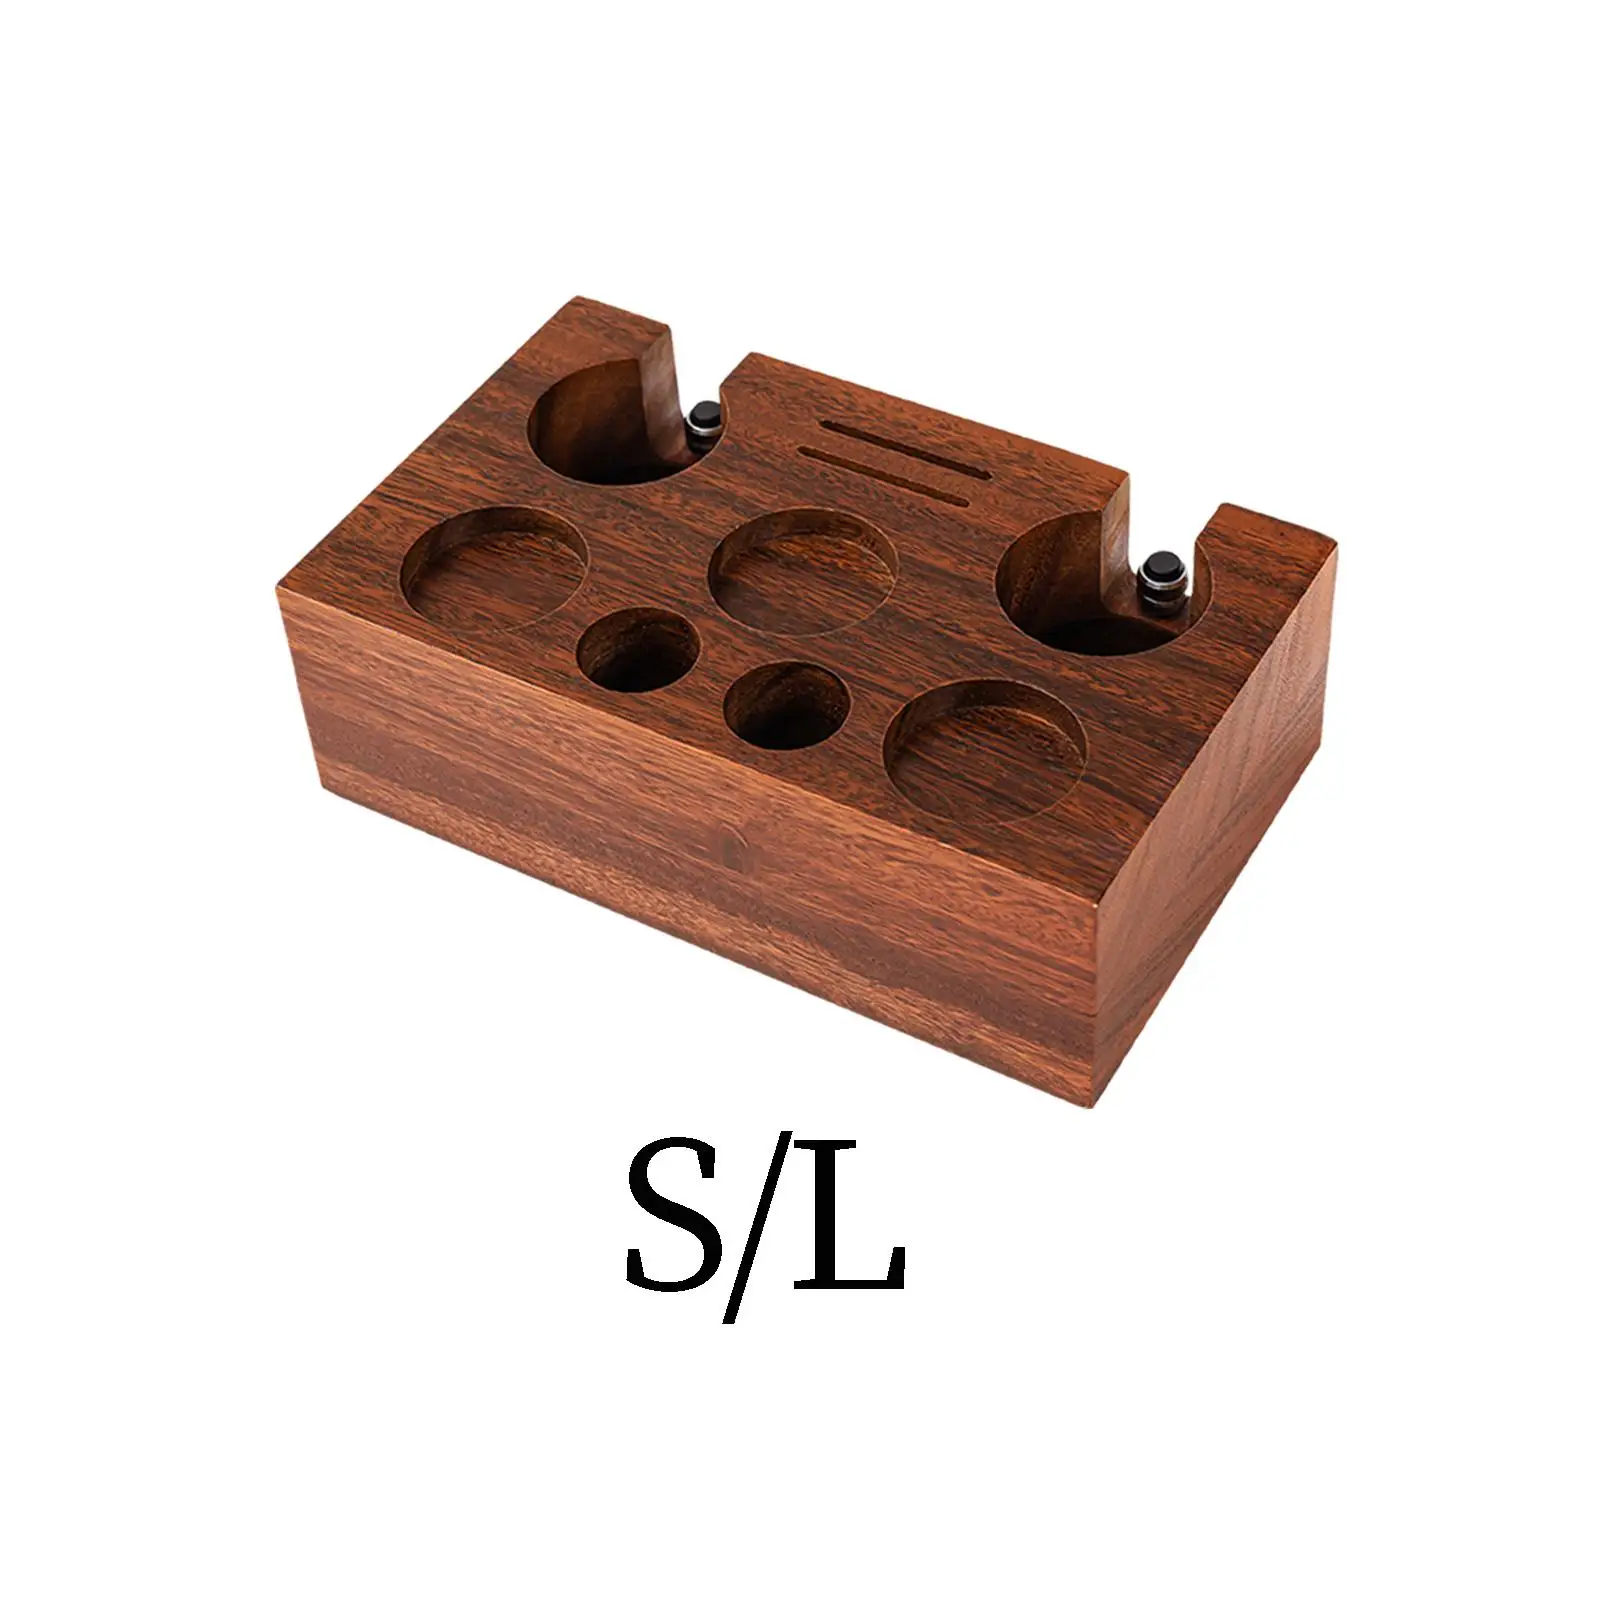 Wooden Coffee Tamper Station Base Tamper Stand and Portafilter Holder for Coffee Bar Home Worktop Shop Barista Tool